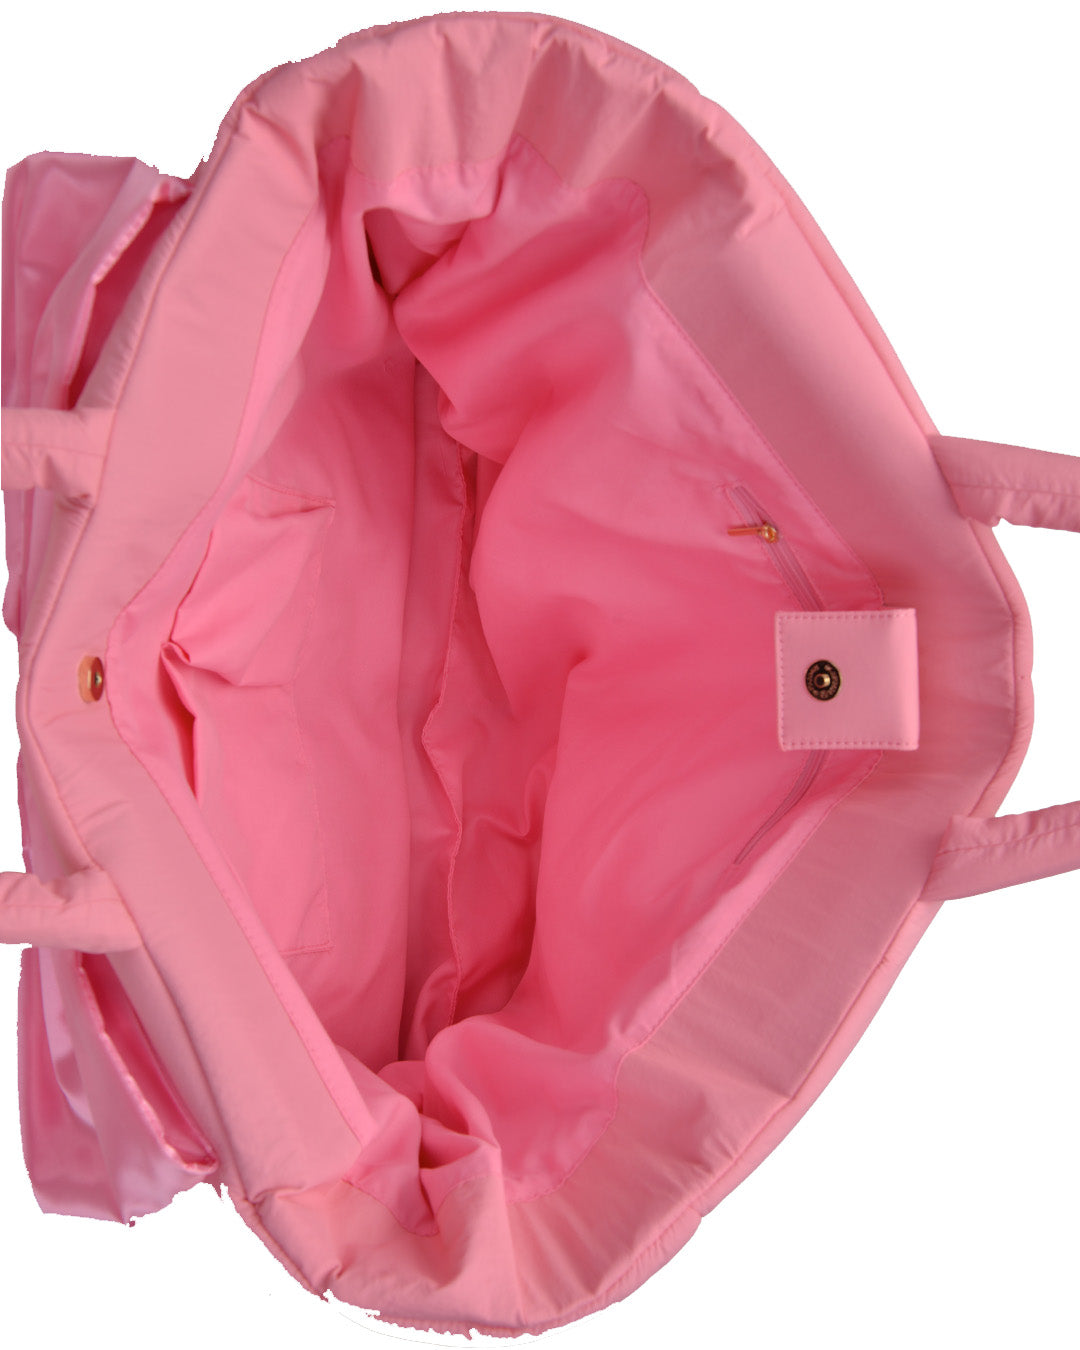 BOW TOTE PINK